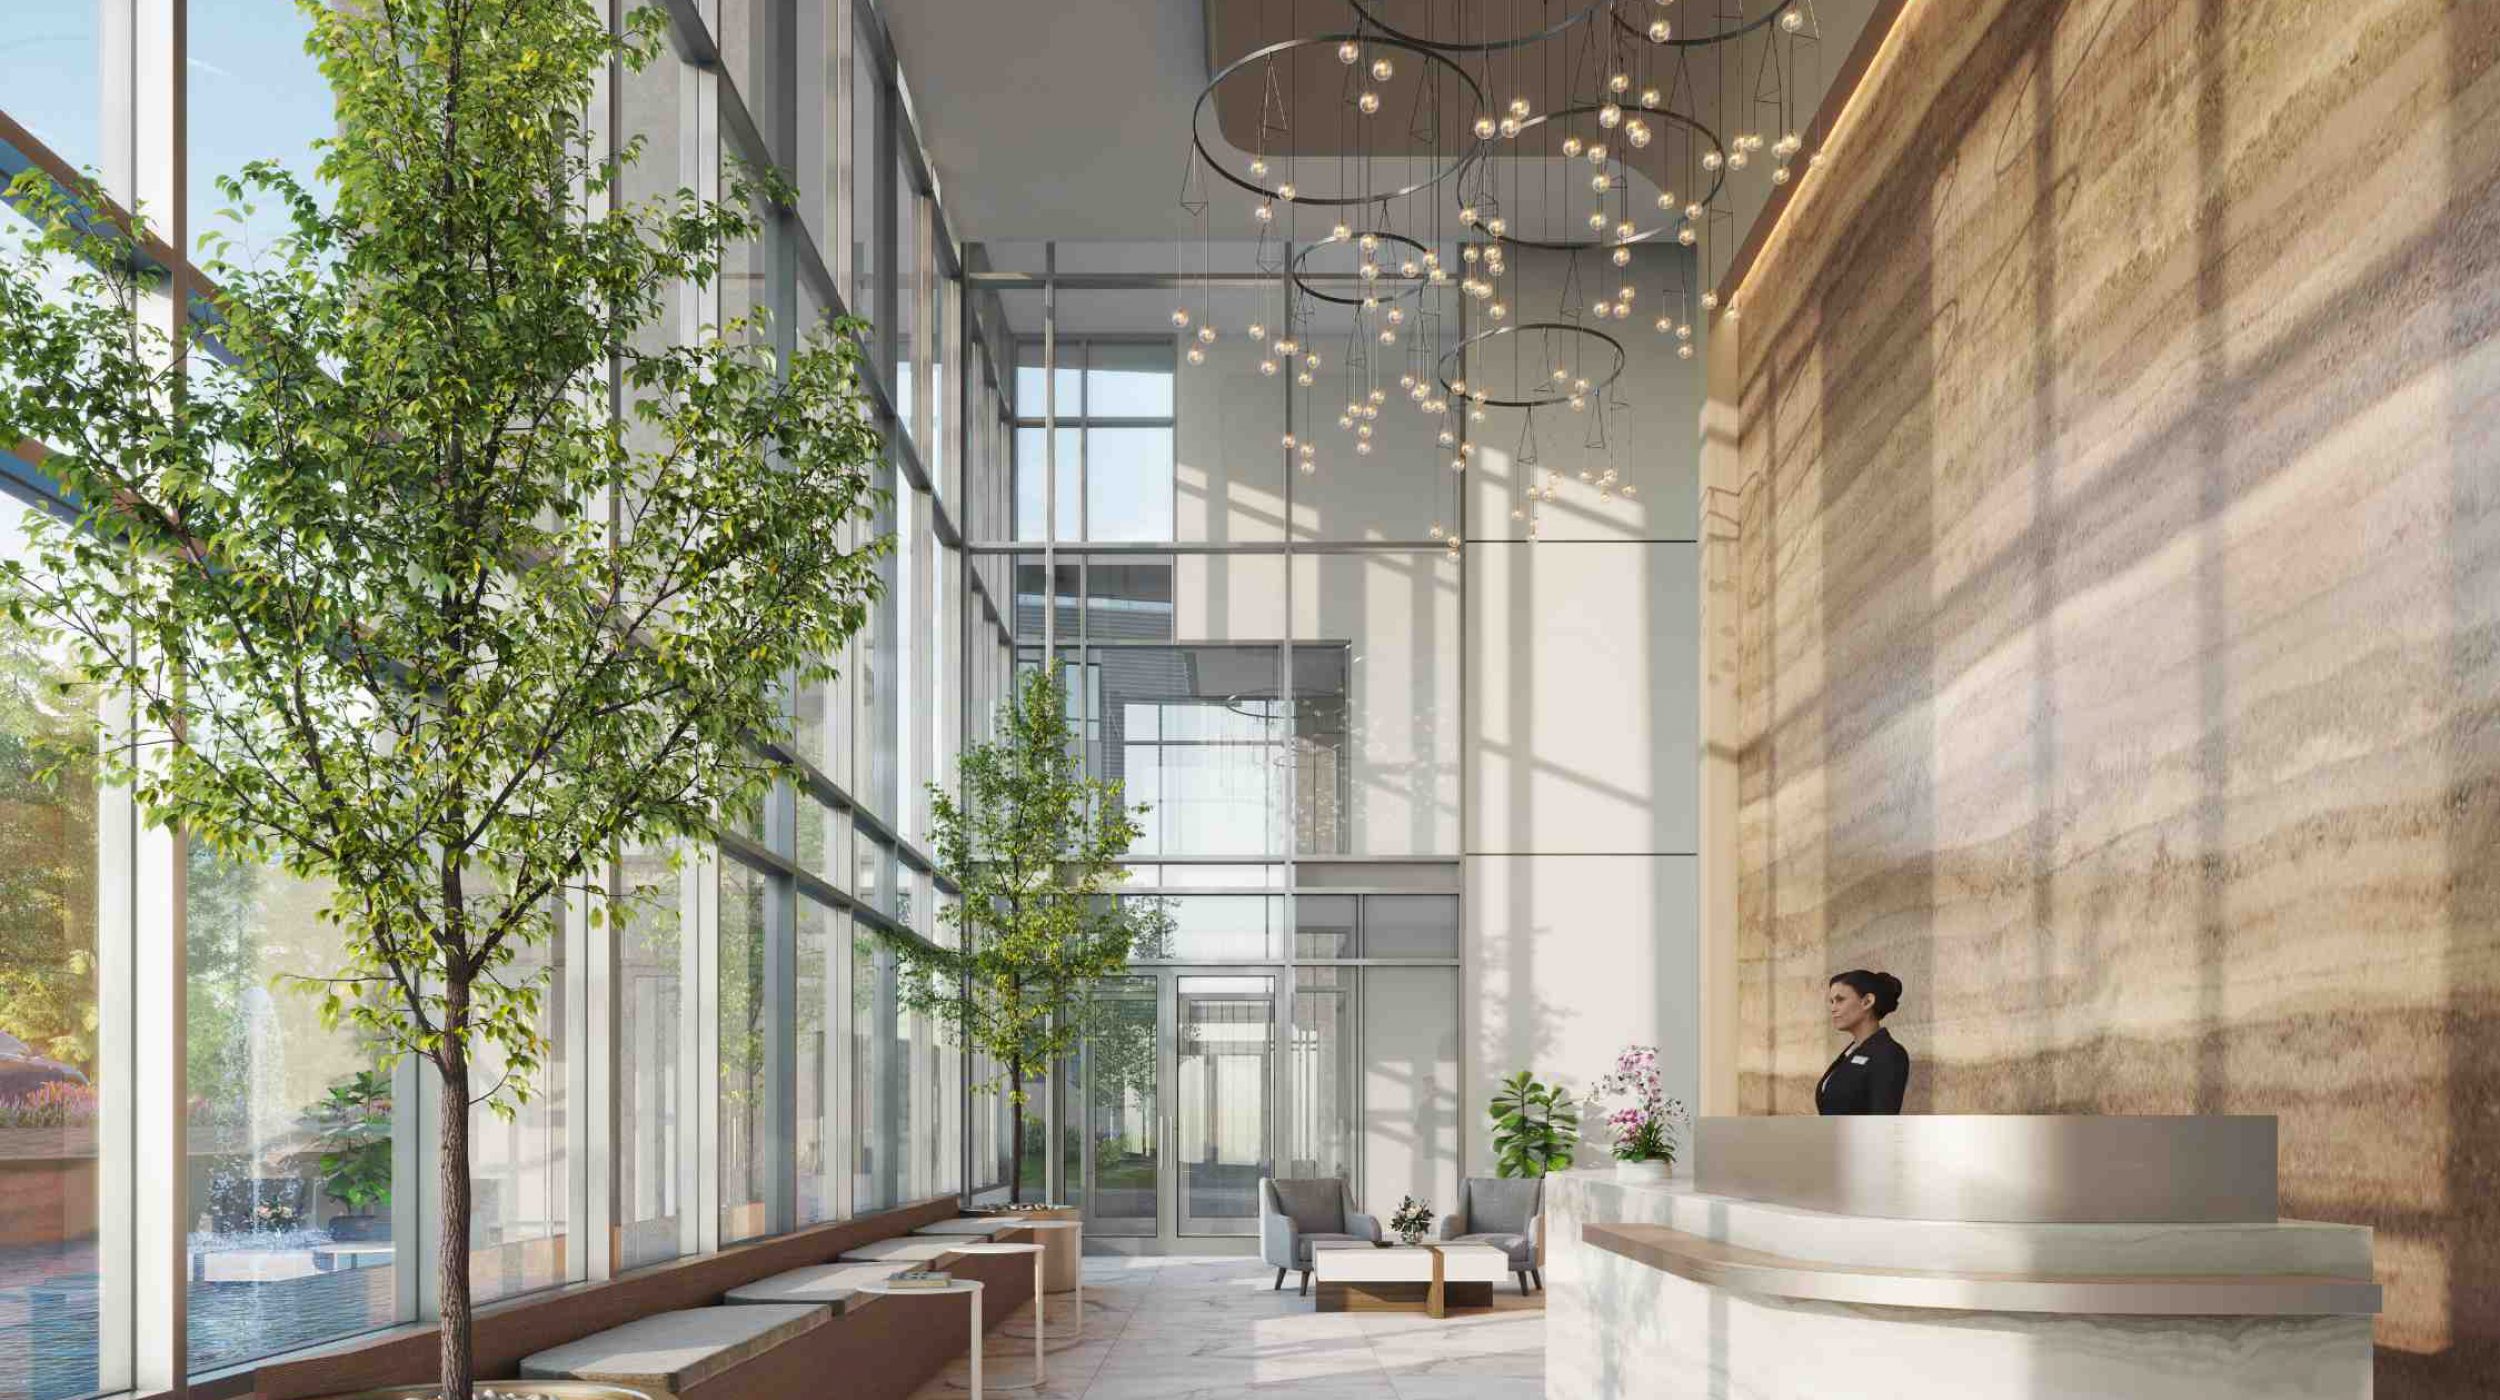 Artesia’s lobby rises from a soothing reflecting pool in constant connection with nature.